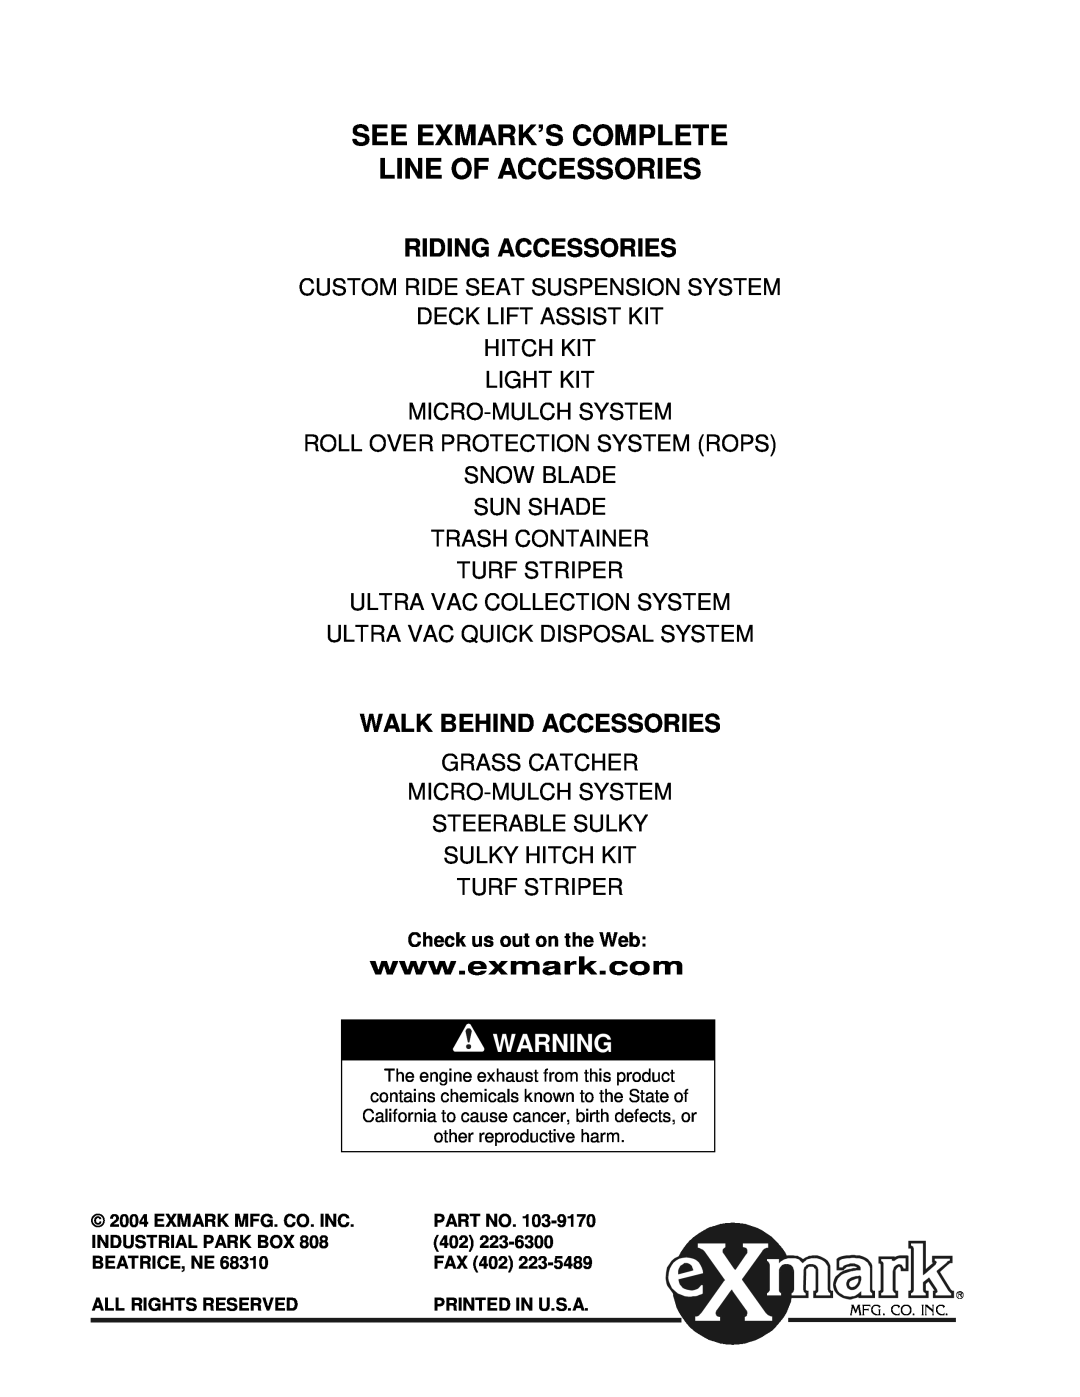 Exmark Lawn Tractor manual Riding Accessories, Walk Behind Accessories, See Exmark’S Complete Line Of Accessories 